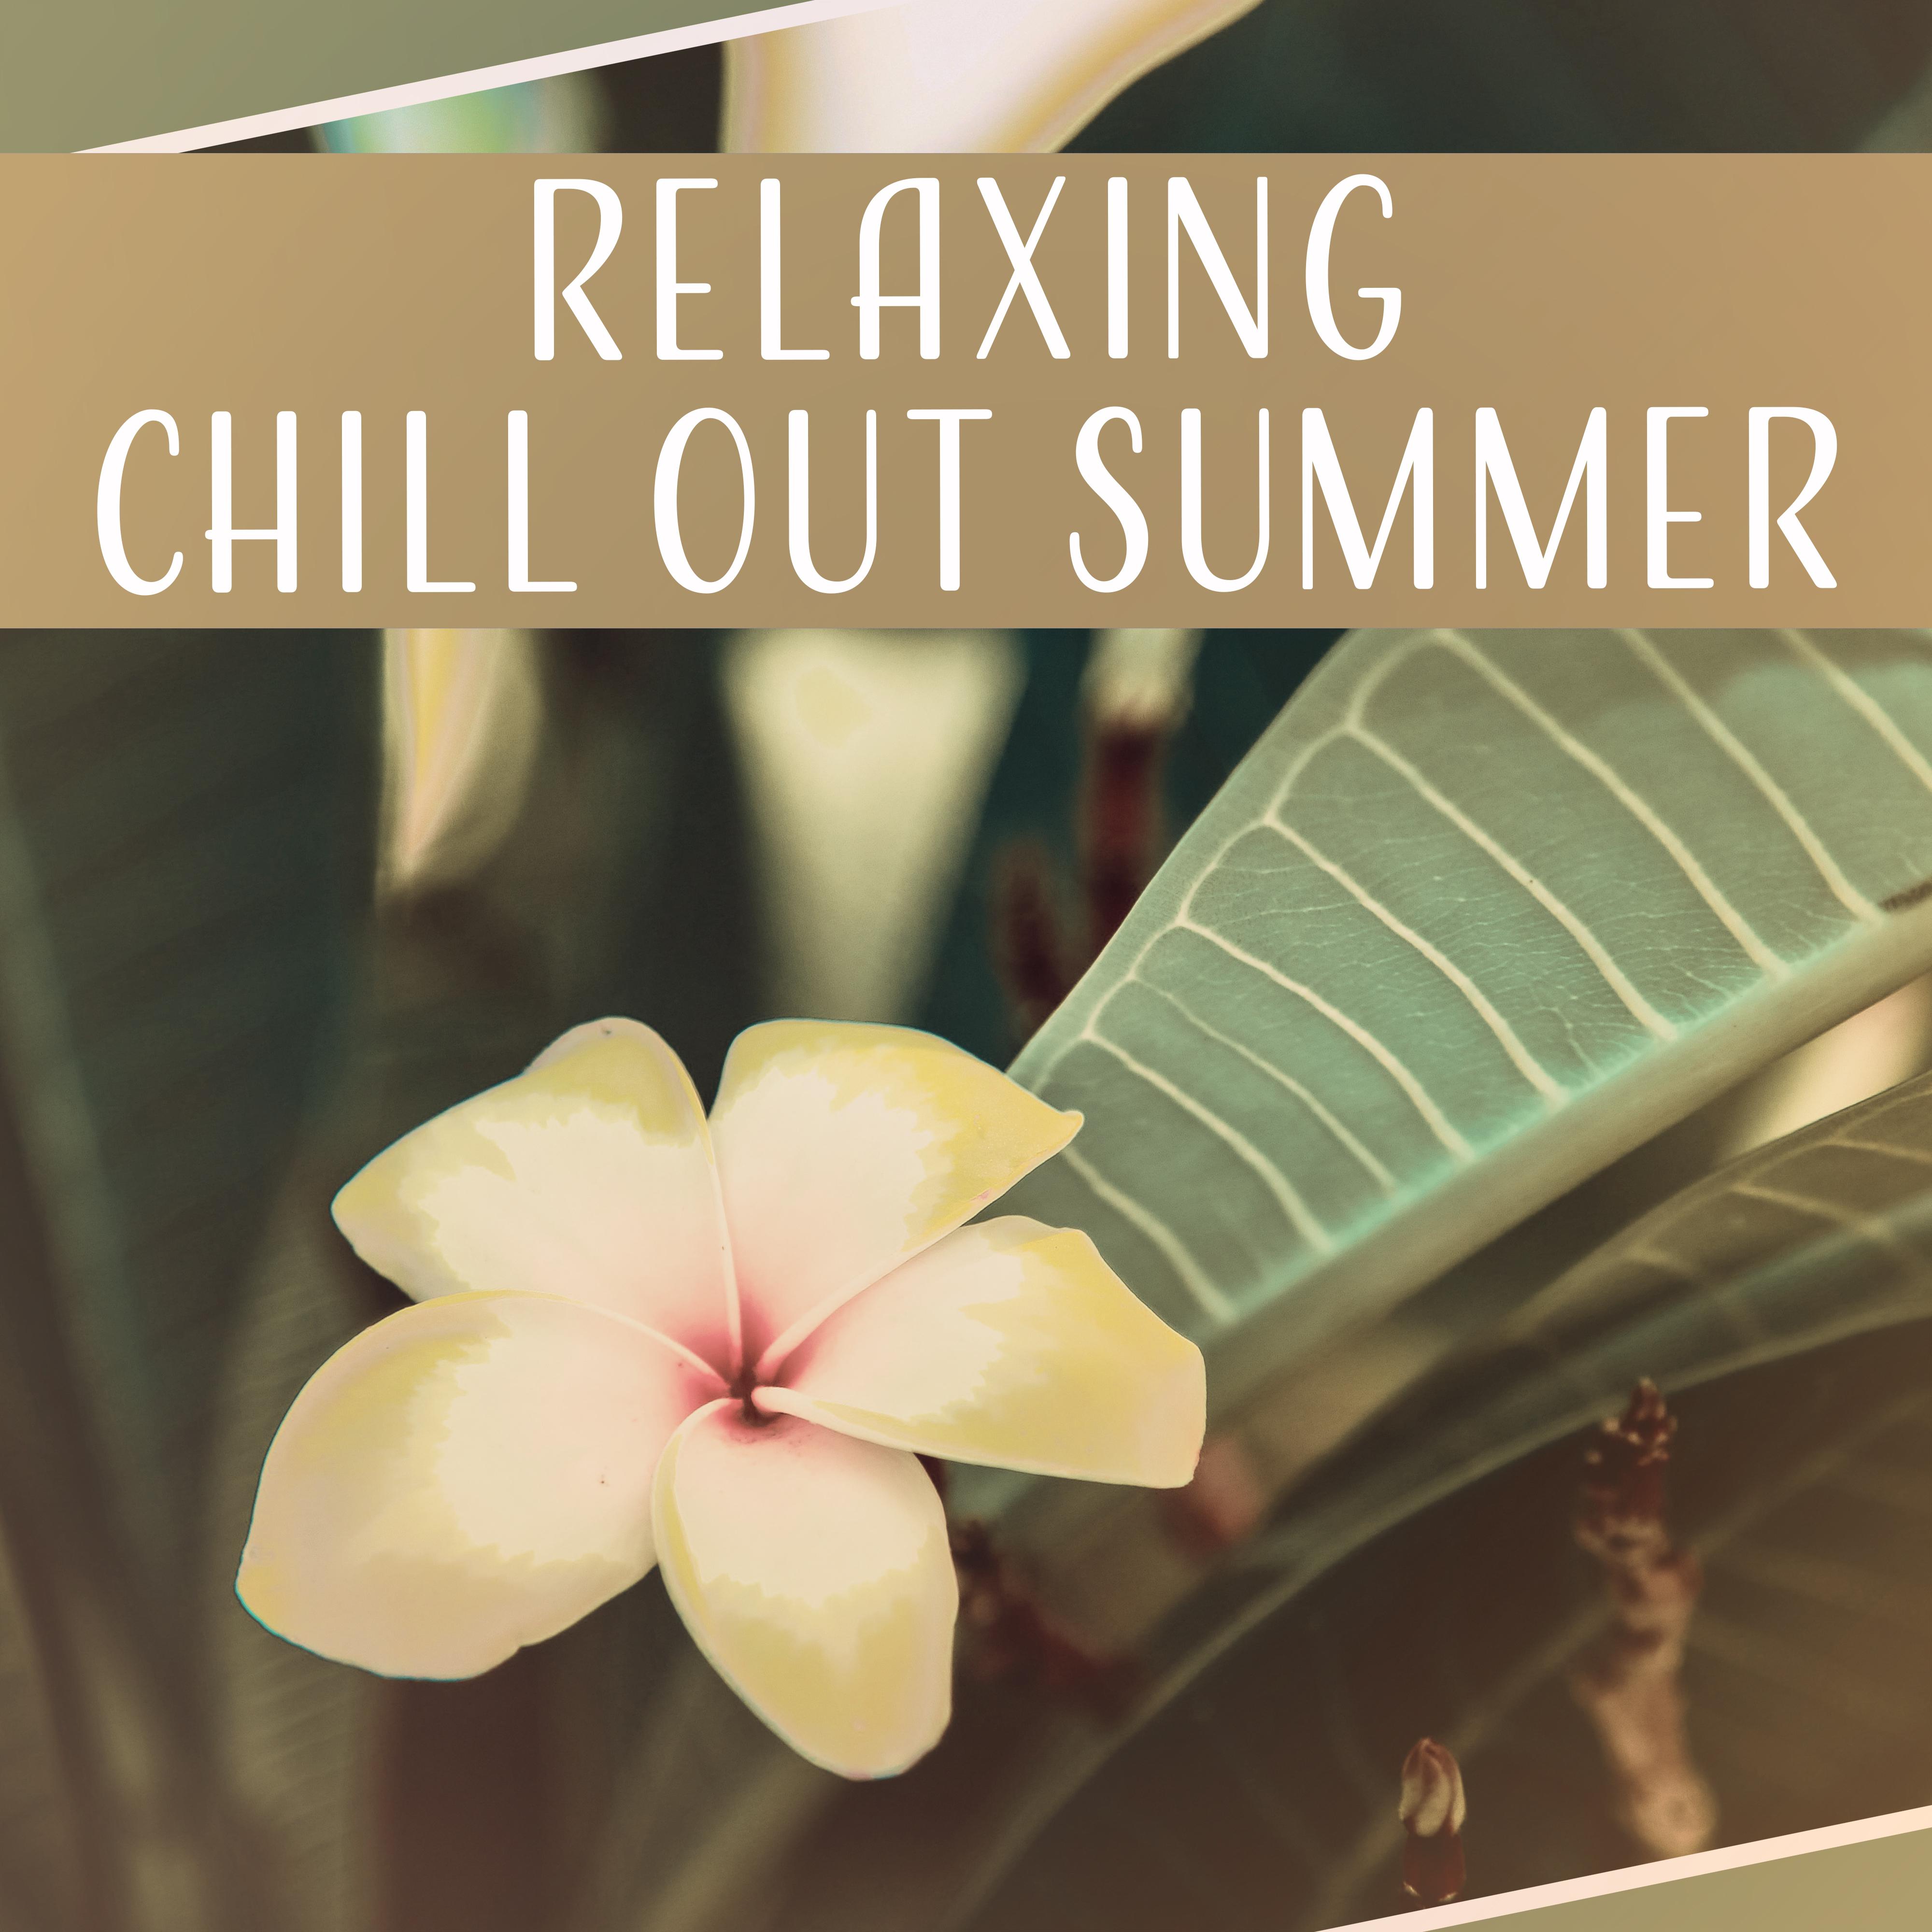 Relaxing Chill Out Summer  Inner Relaxation, Summertime Music, Chill Out Lounge, Rest on the Island, Tropical Sounds